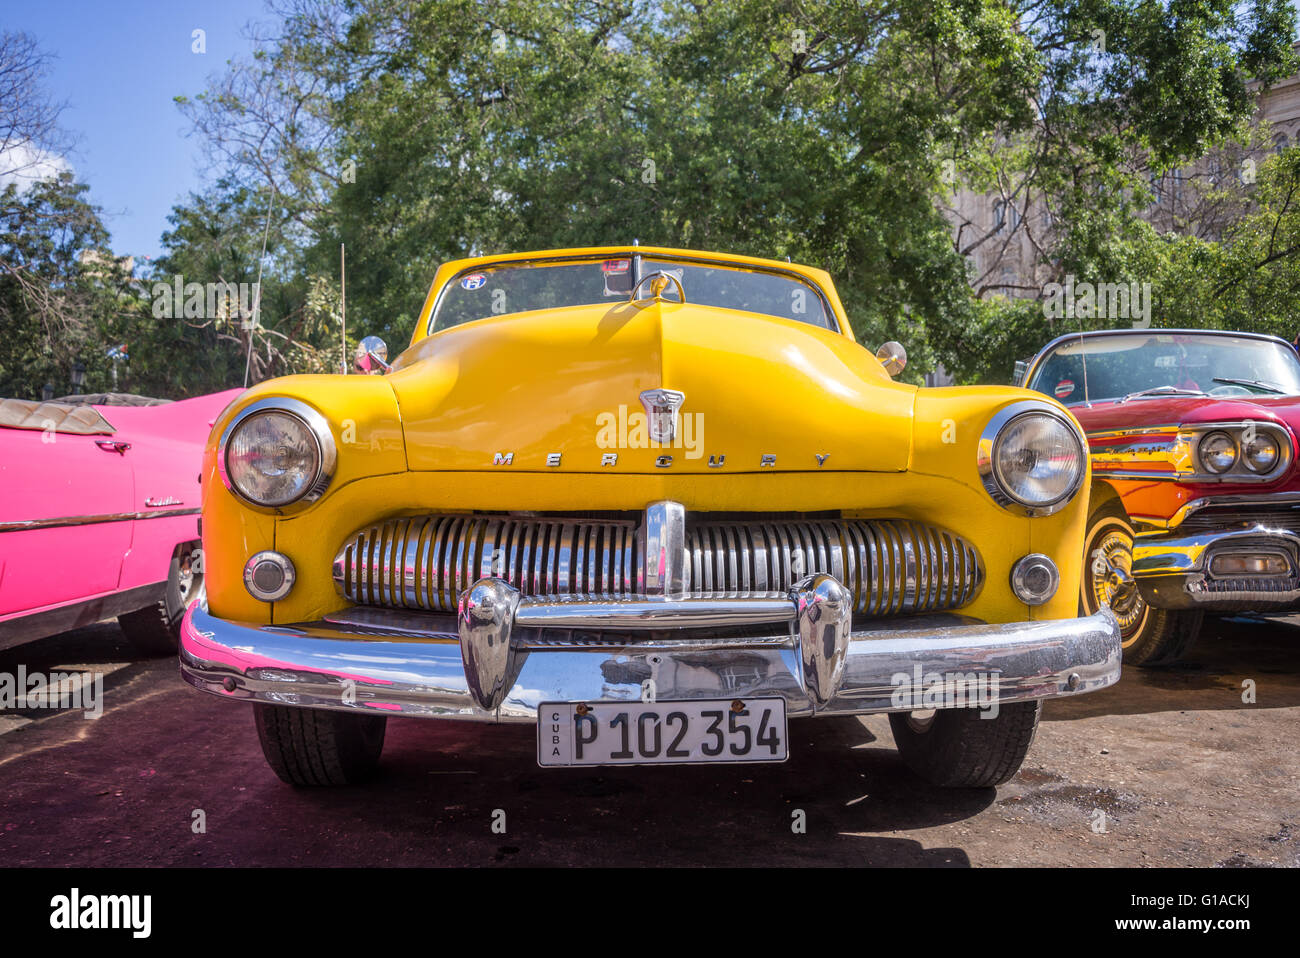 HAVANA, CUBA - APRIL 18: Front of of a yellow classic american Ford Mercury car, on April 18, 2016 in Havana Stock Photo